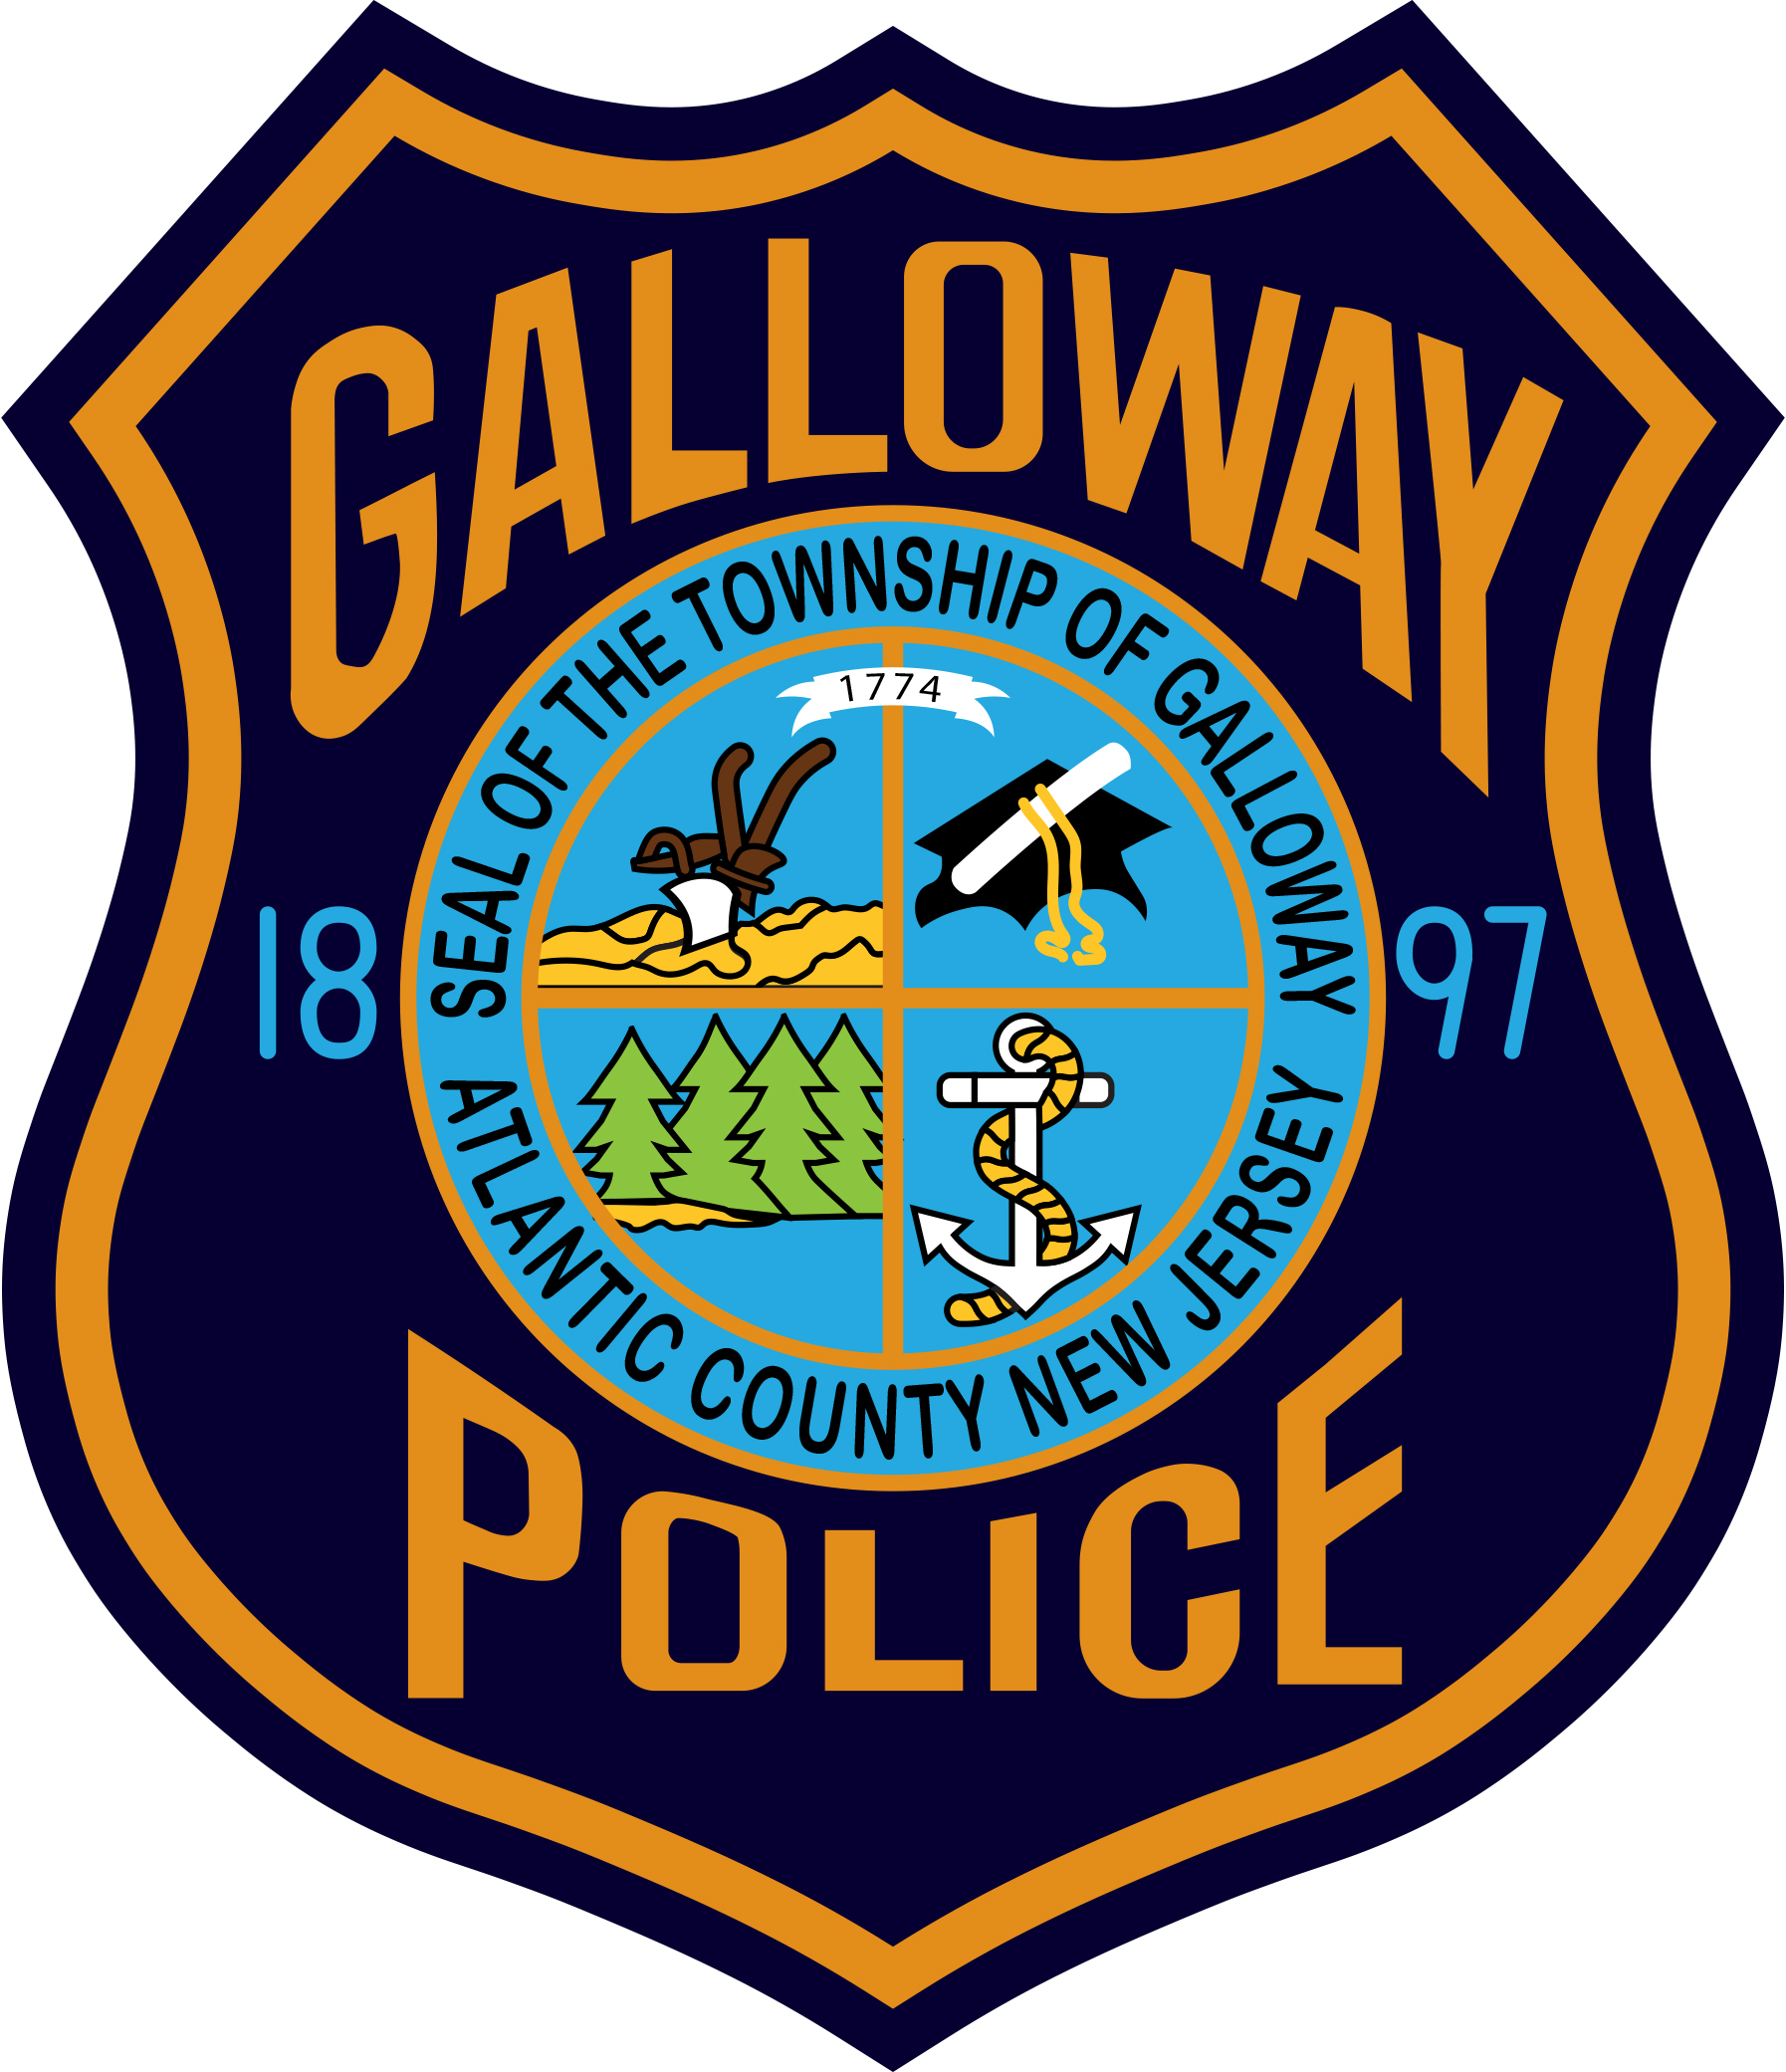 Galloway Township Nj Police Jobs Entry Level Policeapp